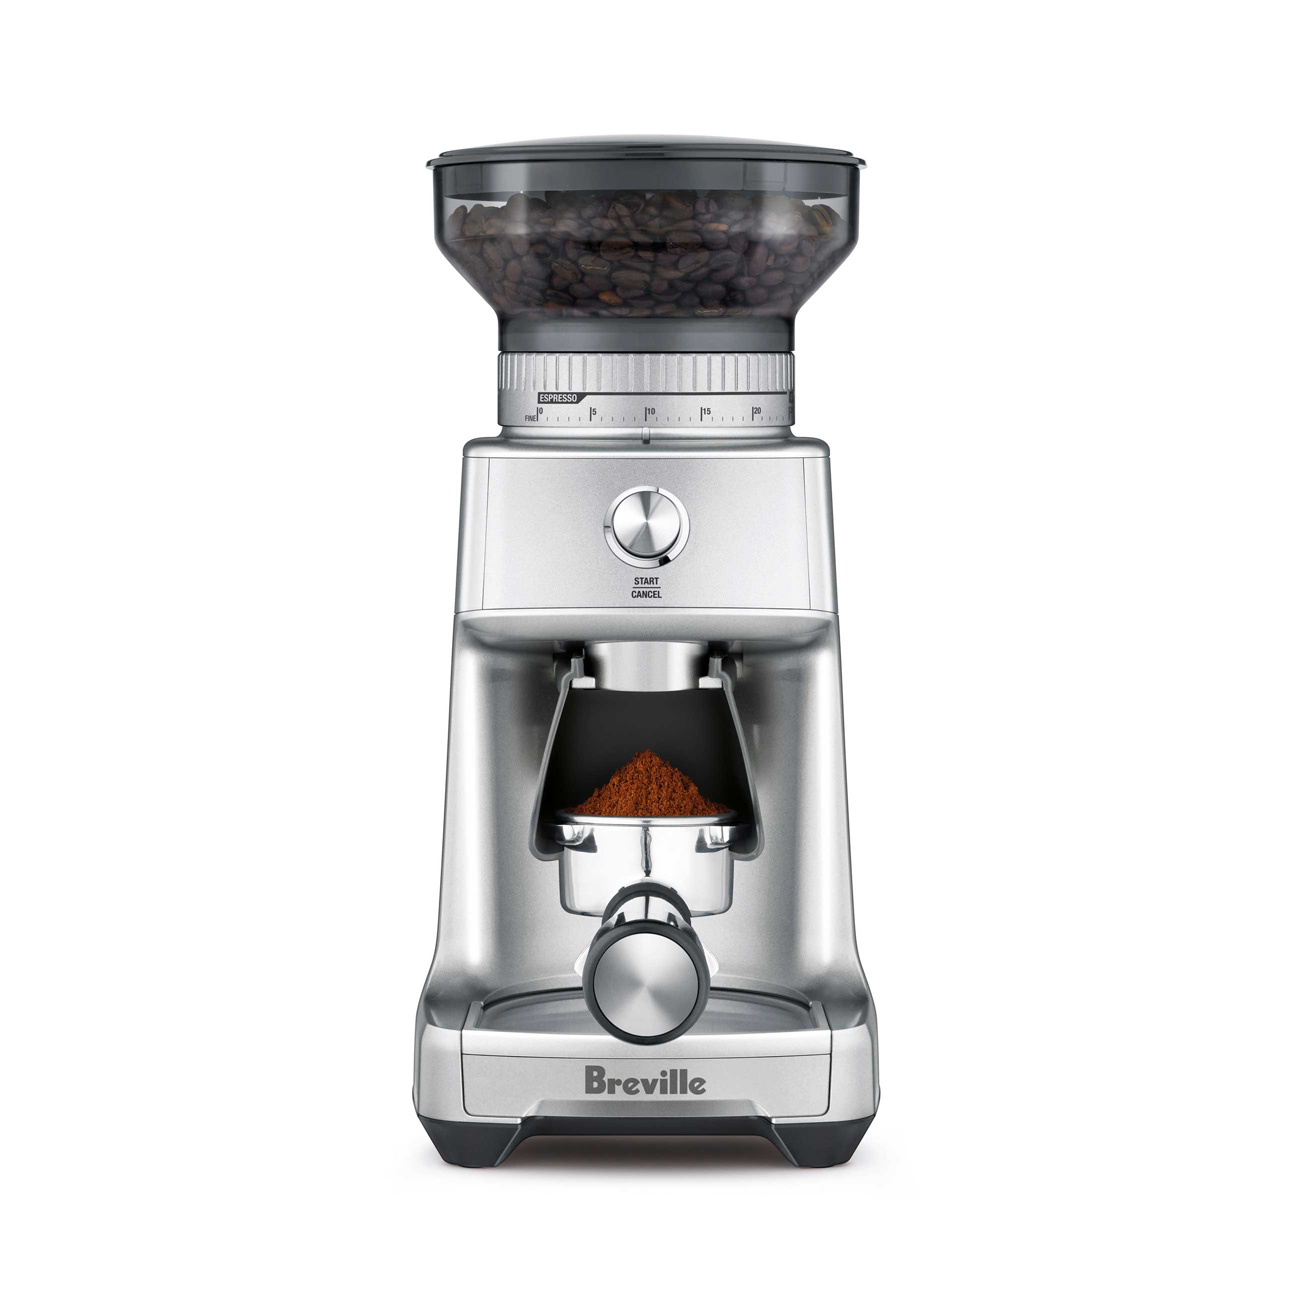 The Dose Control Coffee Grinder Breville